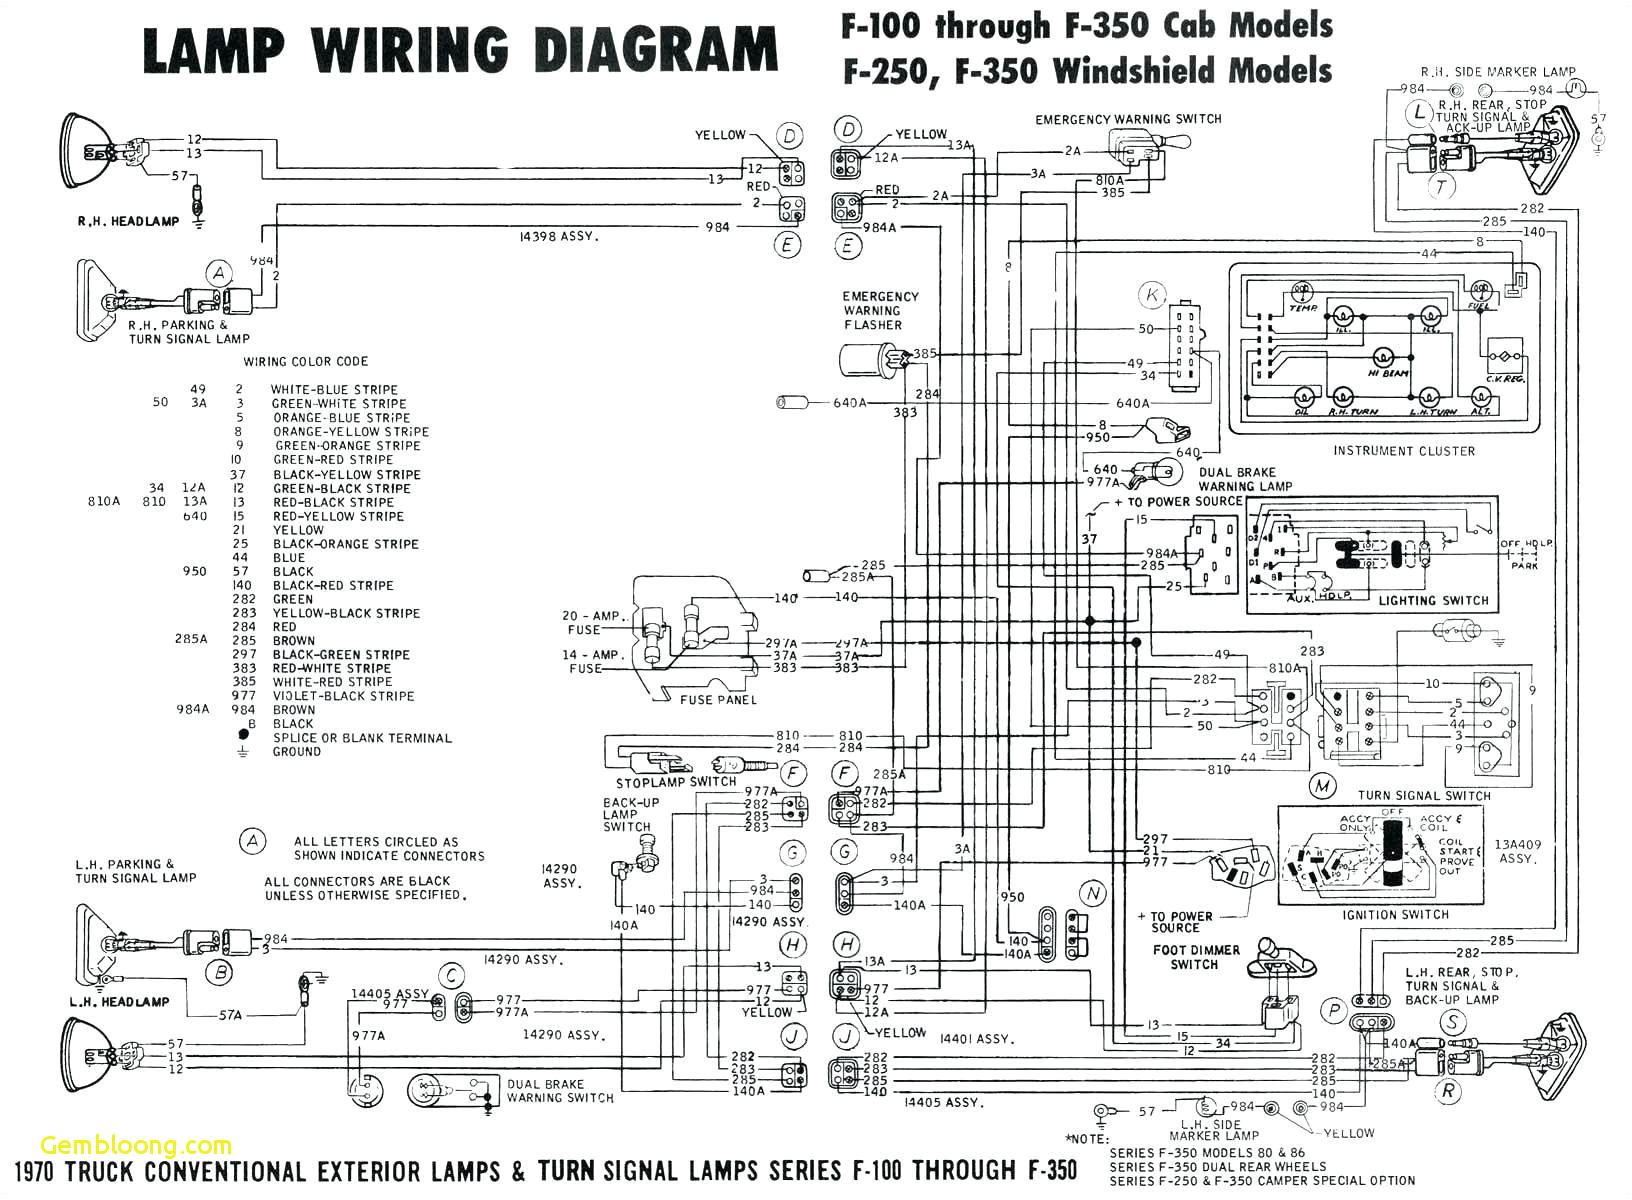 2000 Saturn Wiring Diagram Wiring Diagrams Free Download Ax7221 Wiring Diagram Features